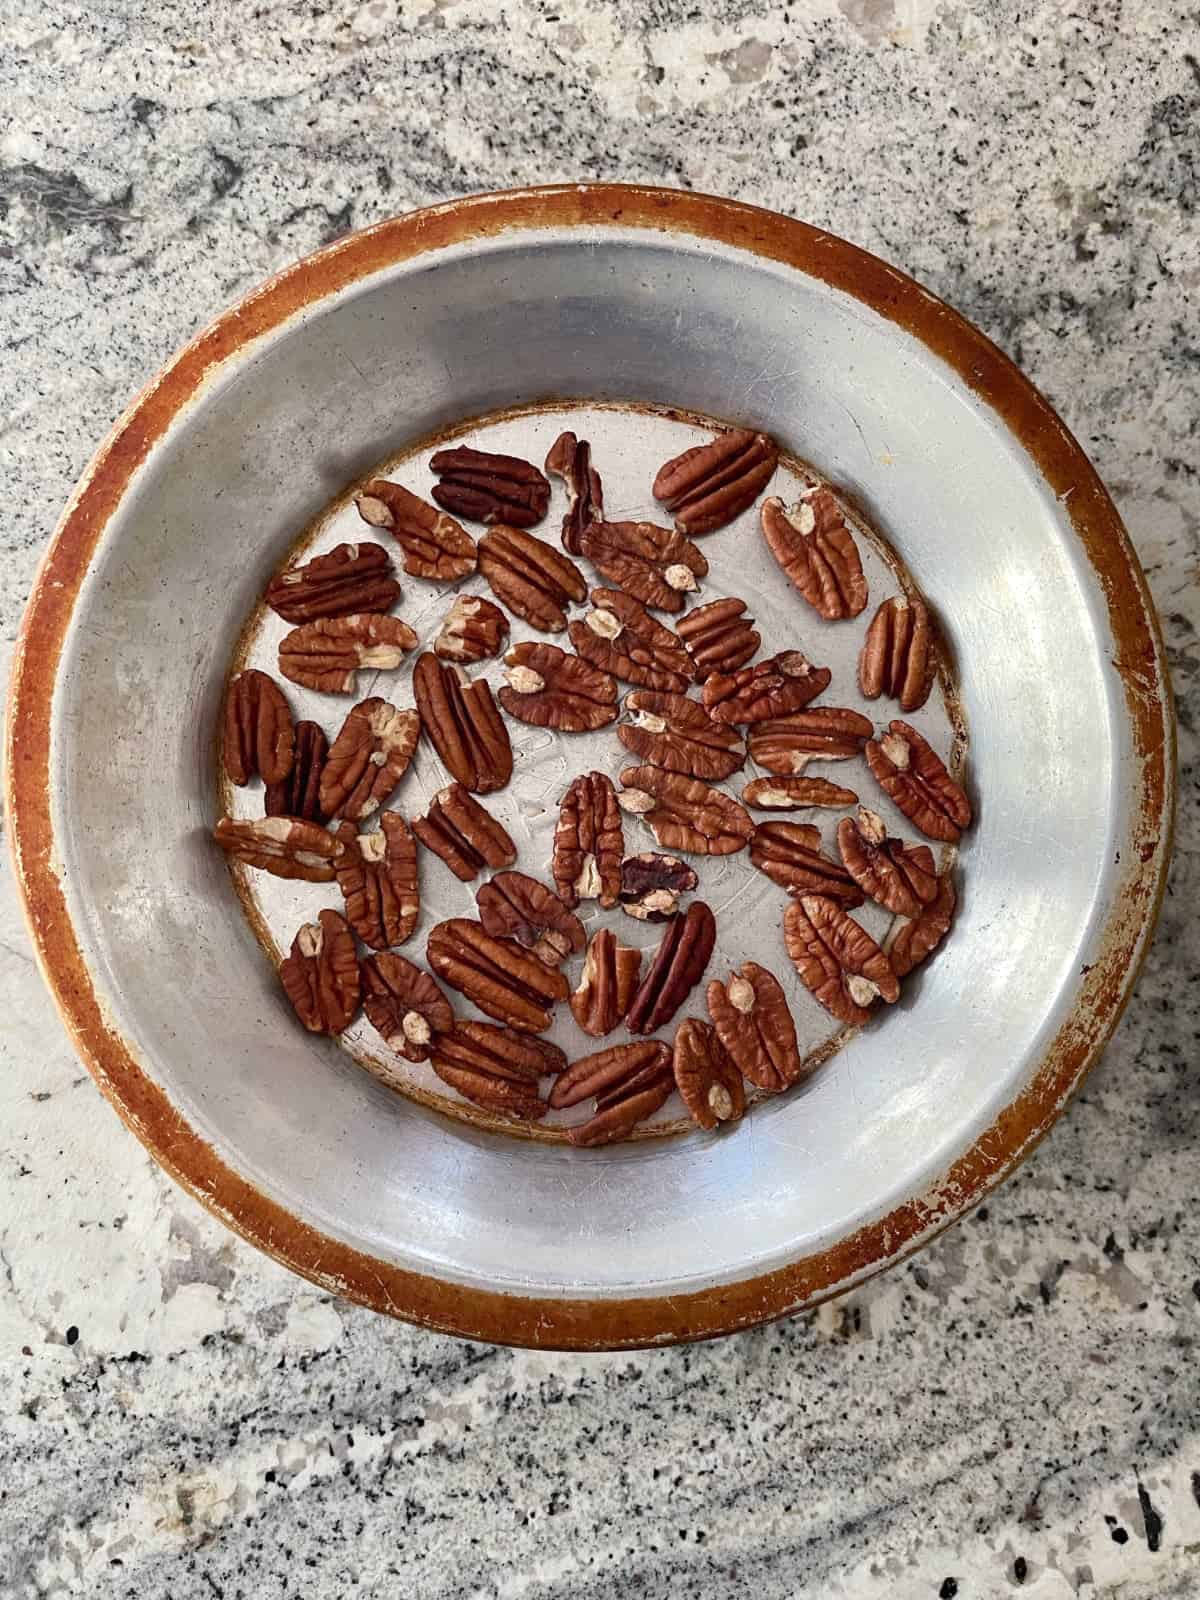 Toasted whole pecans in pie tin on granite counter.